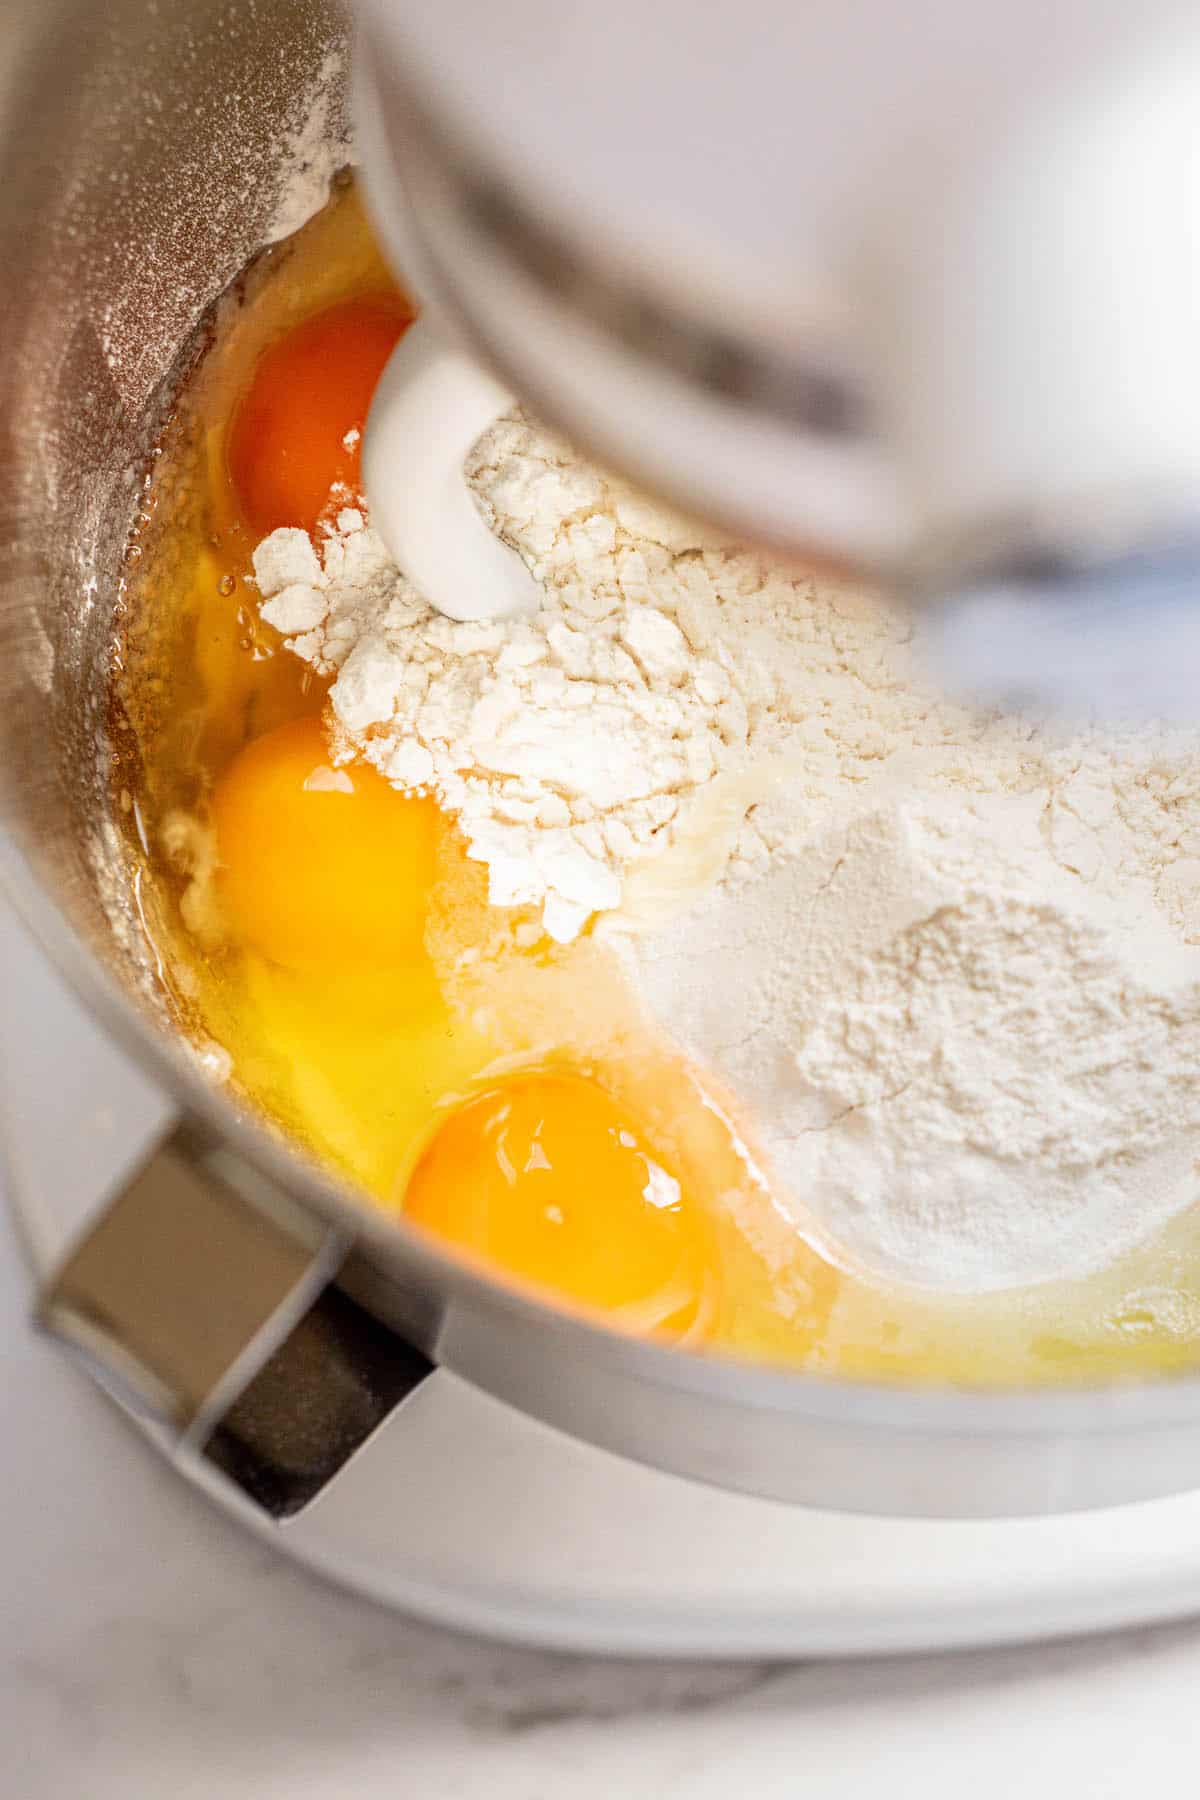 eggs and flour in mixer.